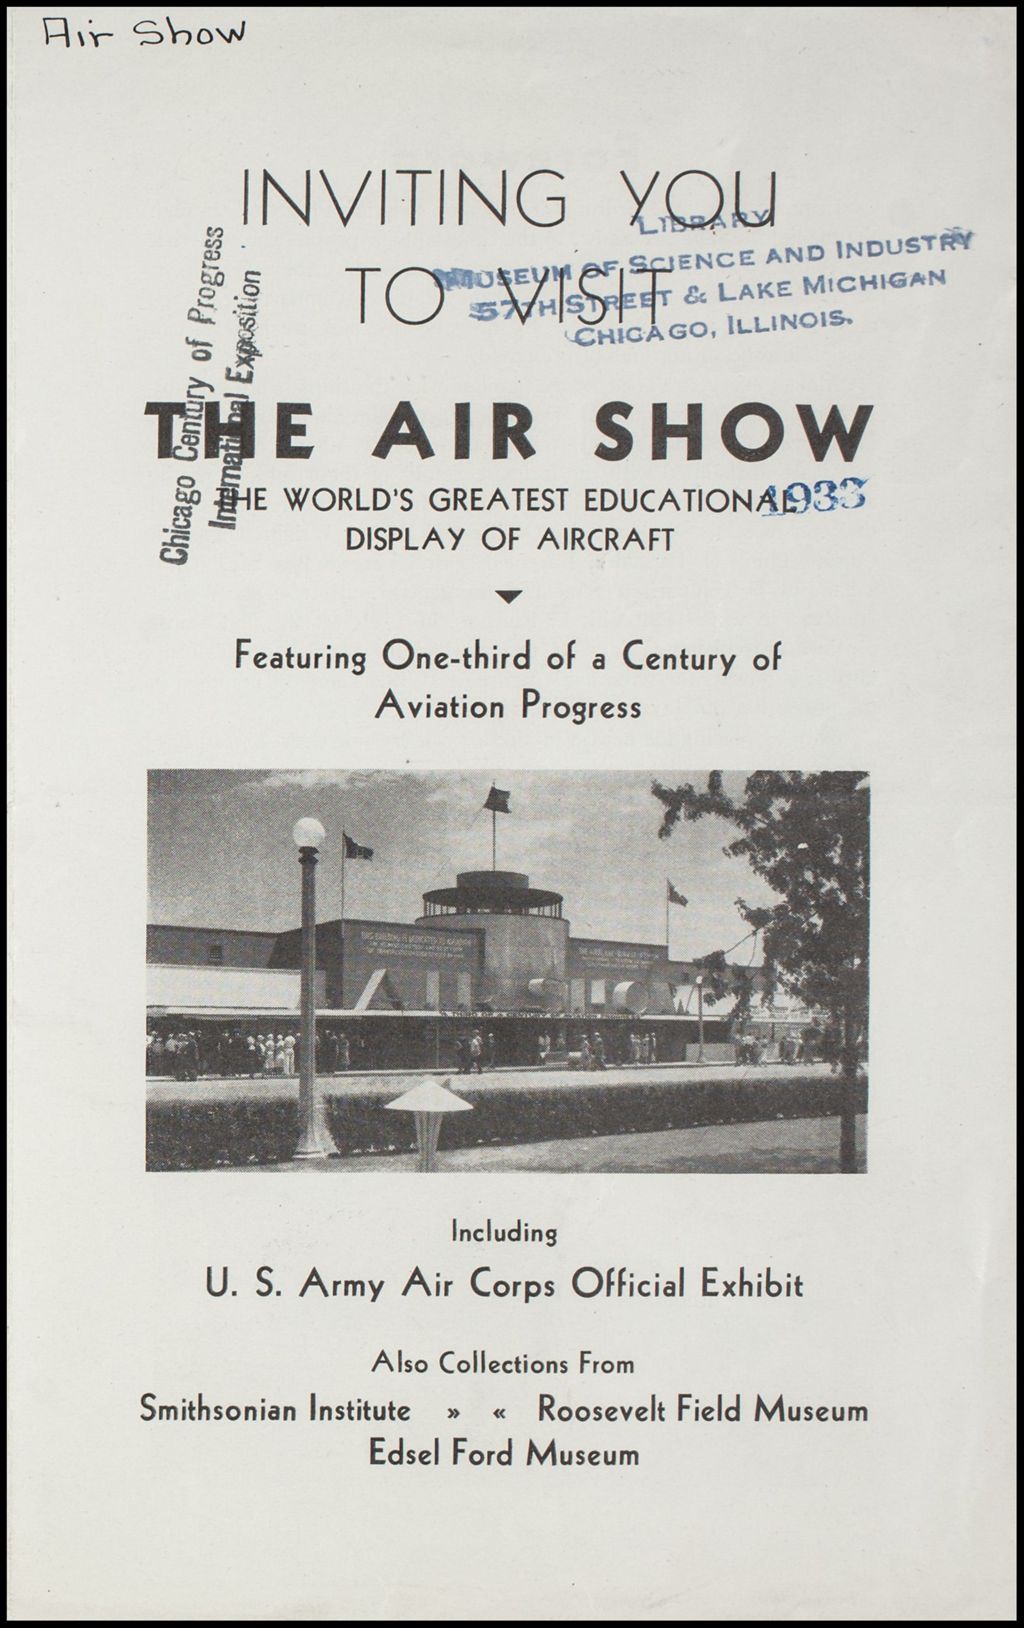 Inviting you to visit the Air Show, the world's greatest educational display of aircraft (Folder 16-254)